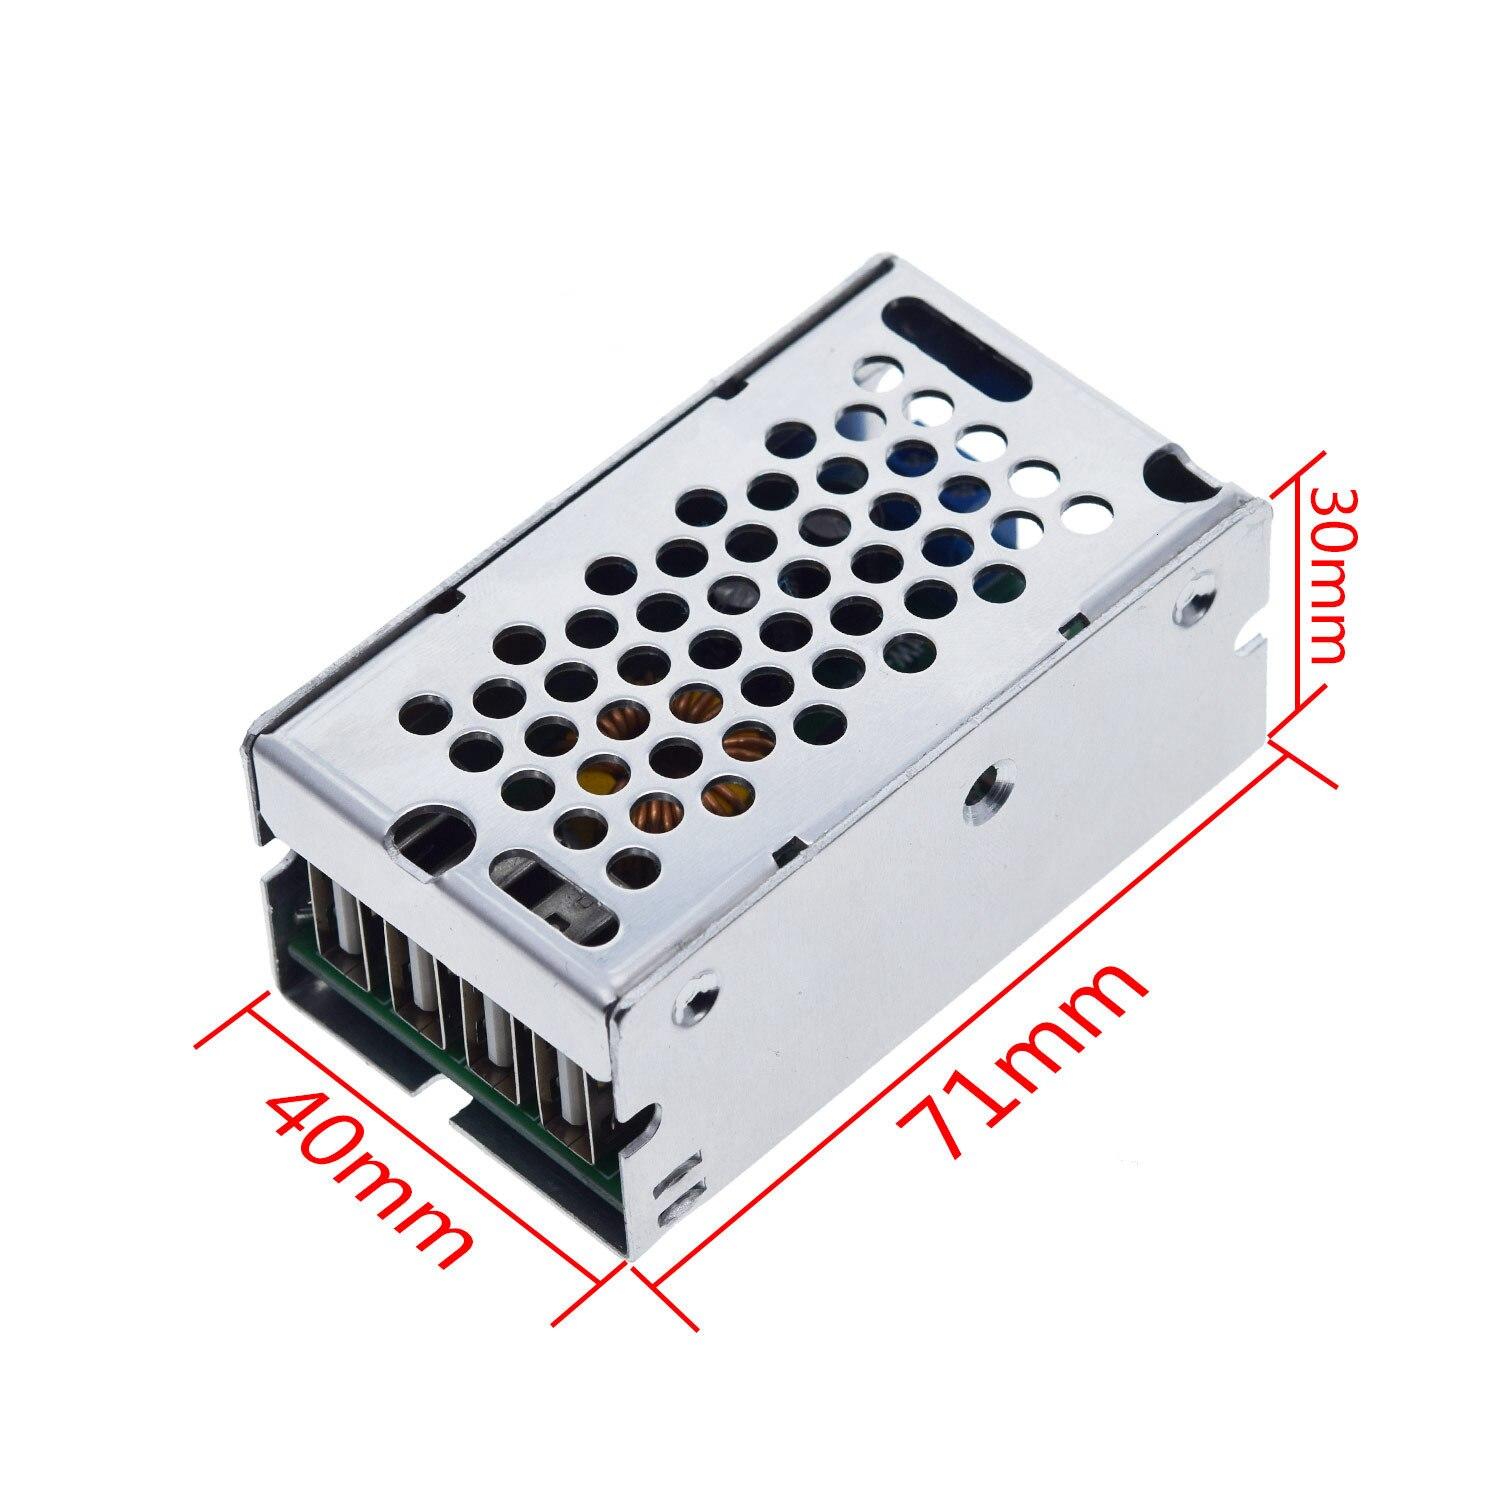 DC-DC 9V 12V 24V 36V To 5V Step Down Board 5A 4 USB Output Buck Converter Power Supply Module with Aluminum Shell For Phones